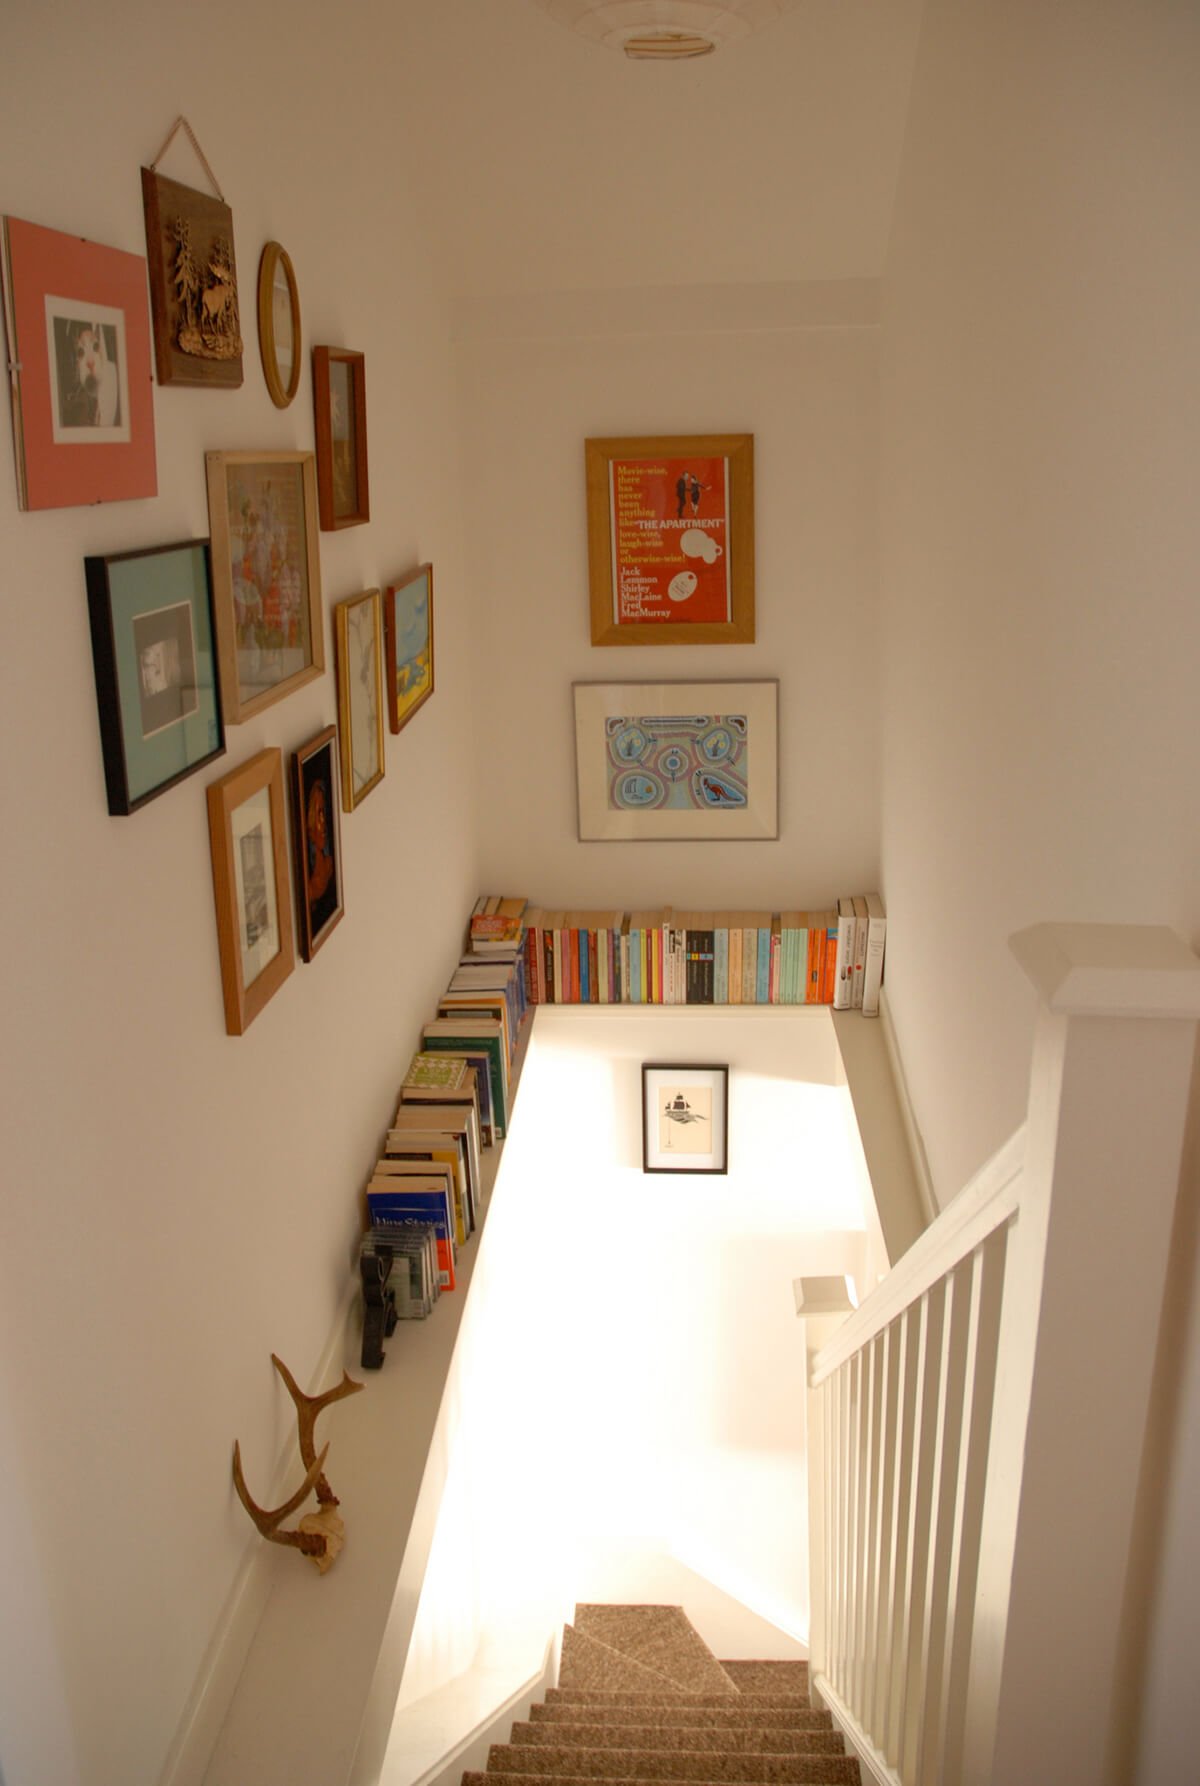 Wes Anderson Inspired Stairwell Bookshelf